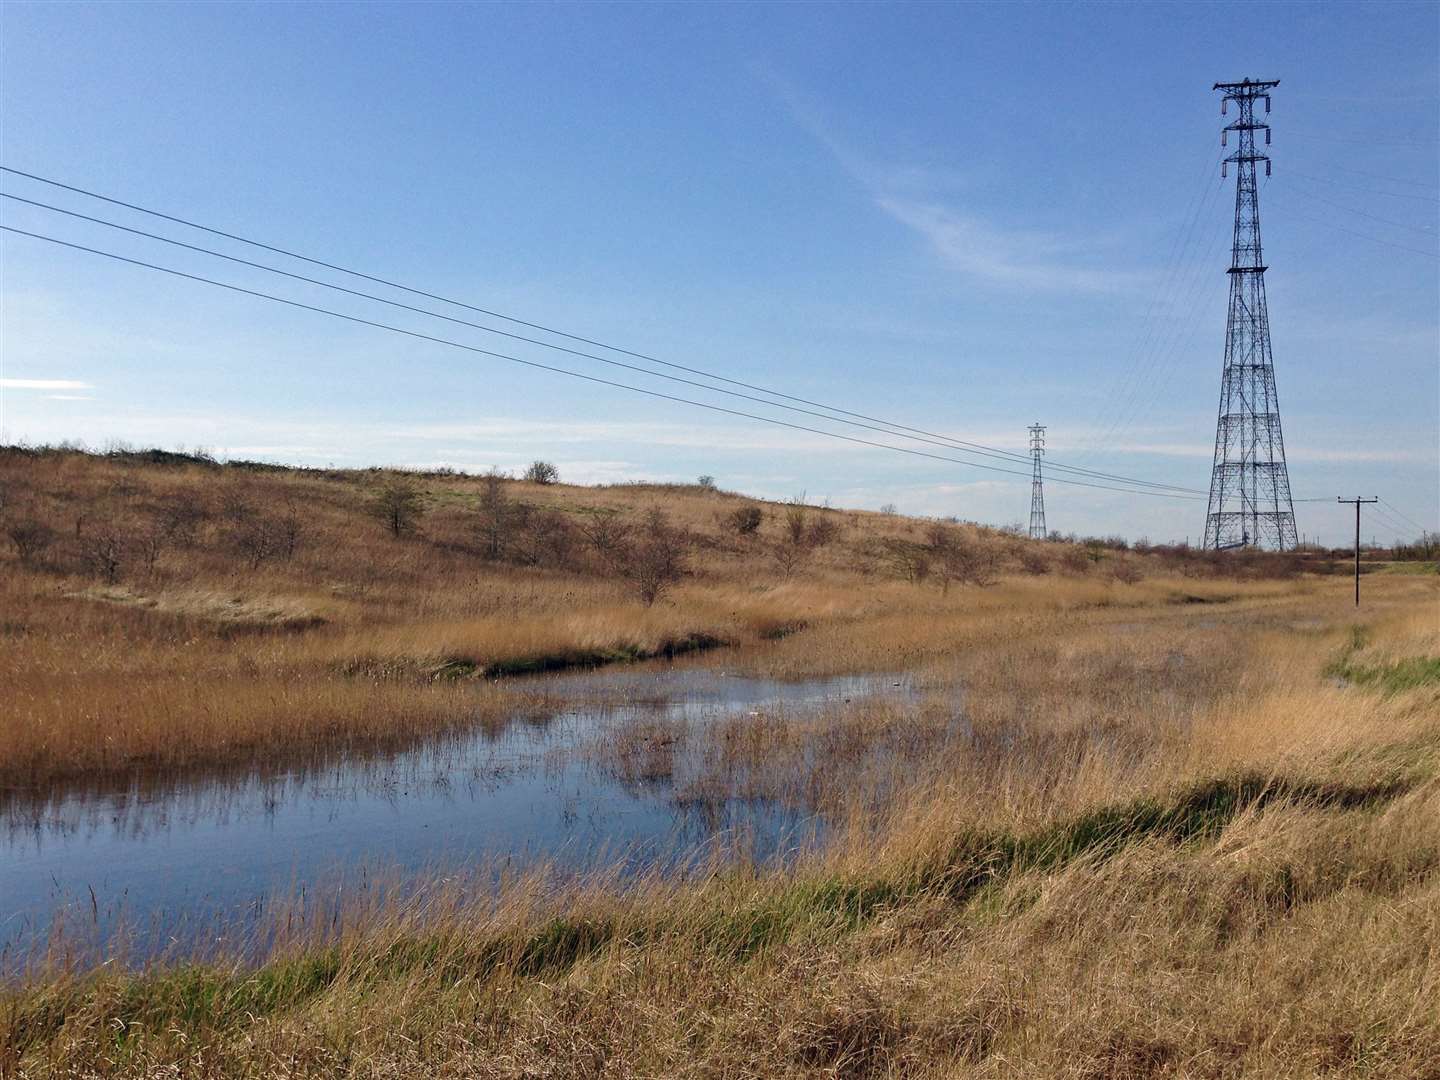 The Swanscombe Marshes where the London Resort is planned is subject to protected environmental status. Picture: Diamond Geezer